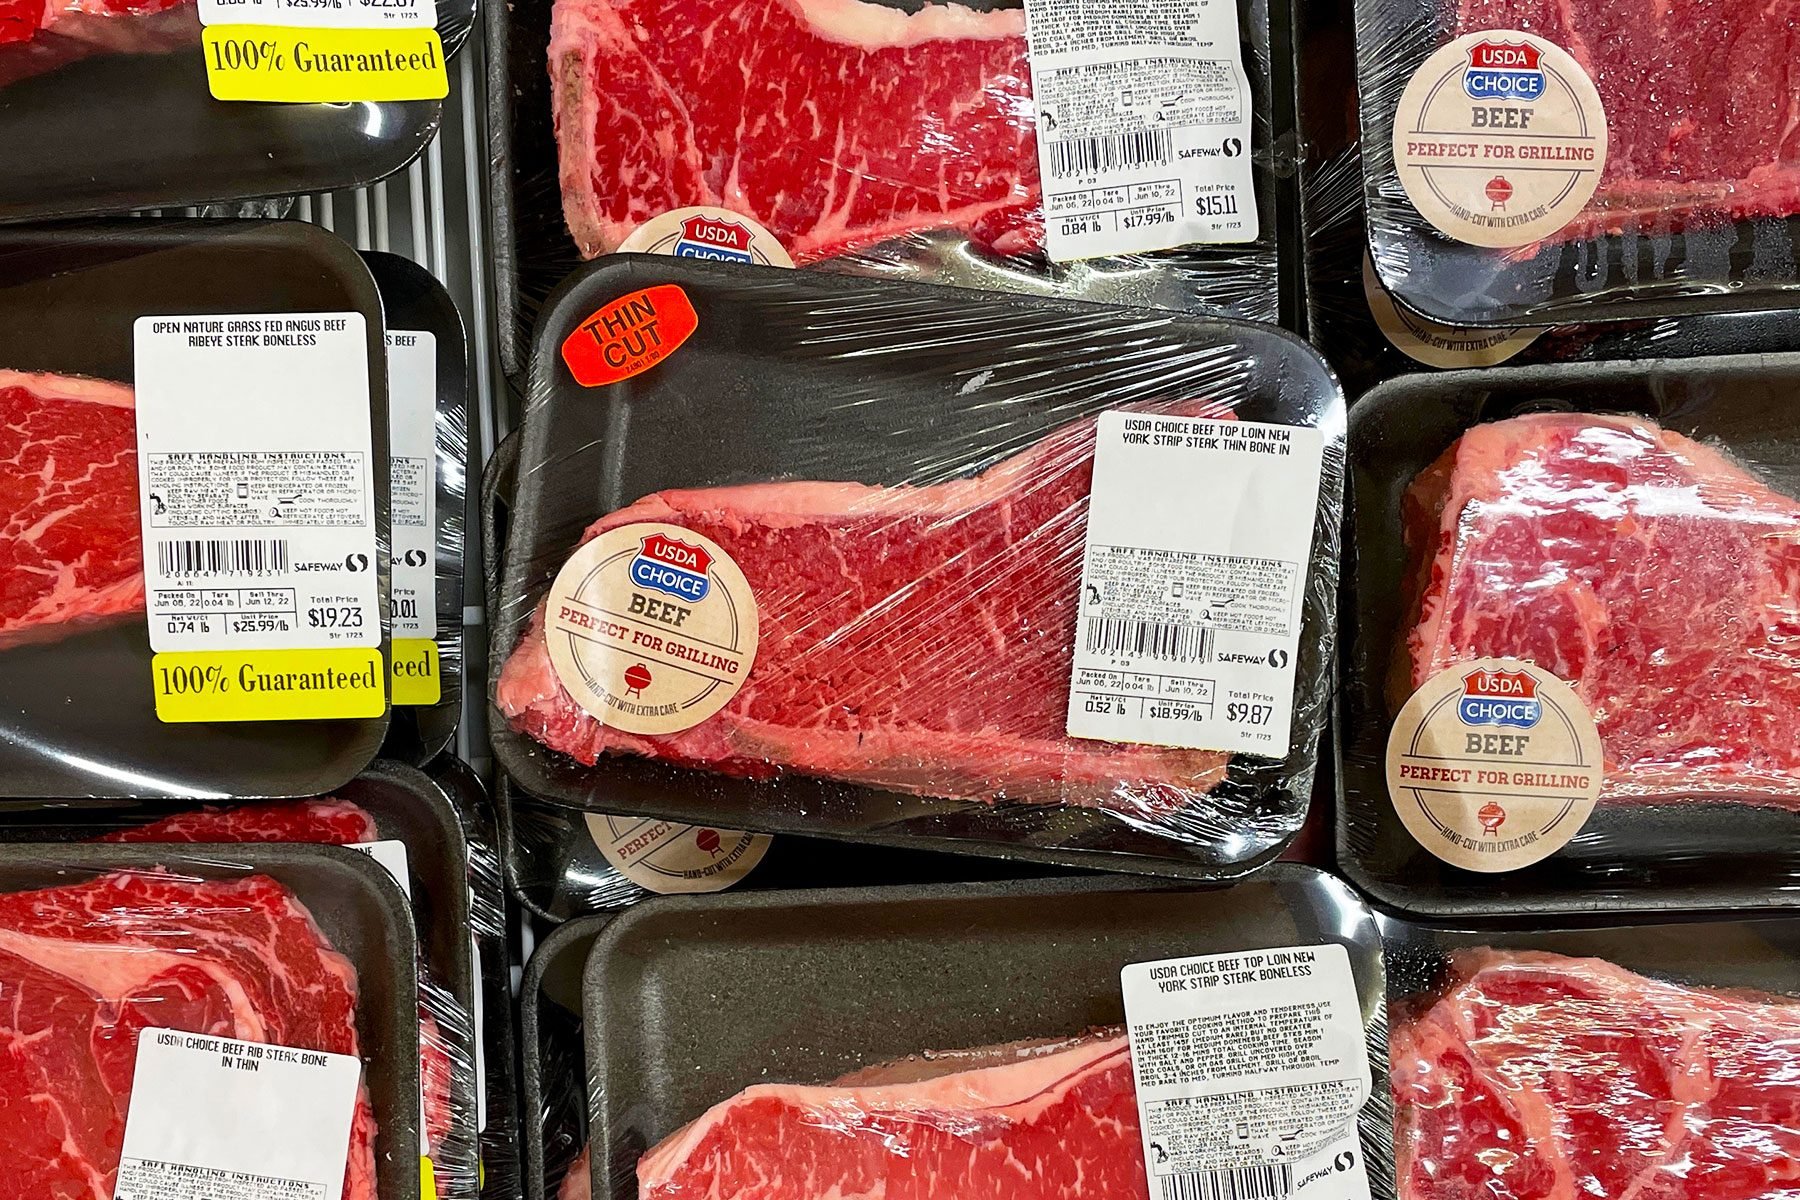 https://www.rd.com/wp-content/uploads/2023/06/Getty-1401803720-Resize-Recolor-Crop-DH-RD-How-to-Get-Freshest-Meat-at-the-Grocery-Store.jpg